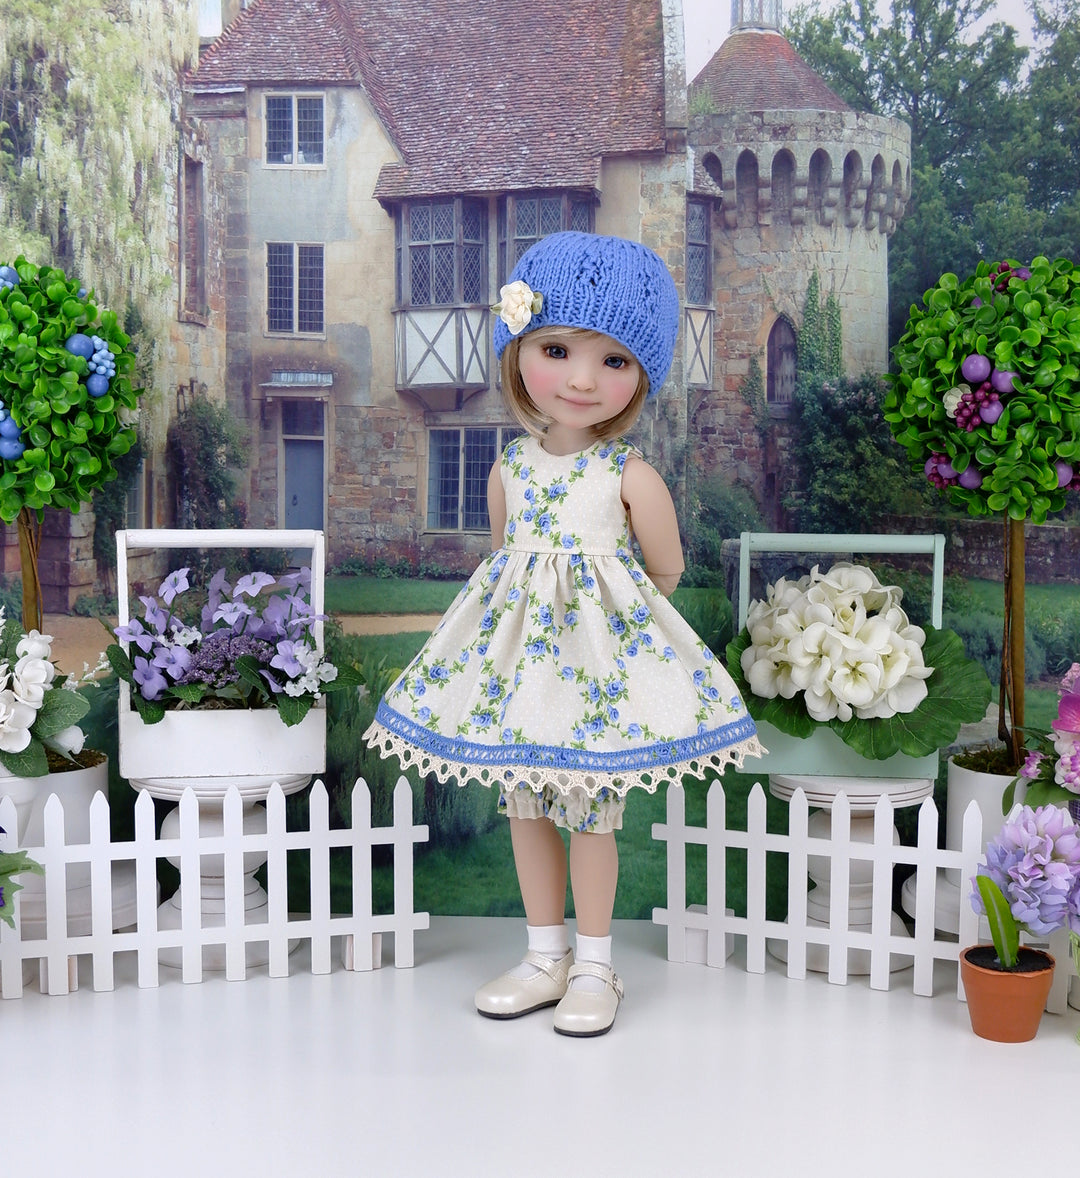 Blue Tea Roses - dress and sweater set with shoes for Ruby Red Fashion Friends doll